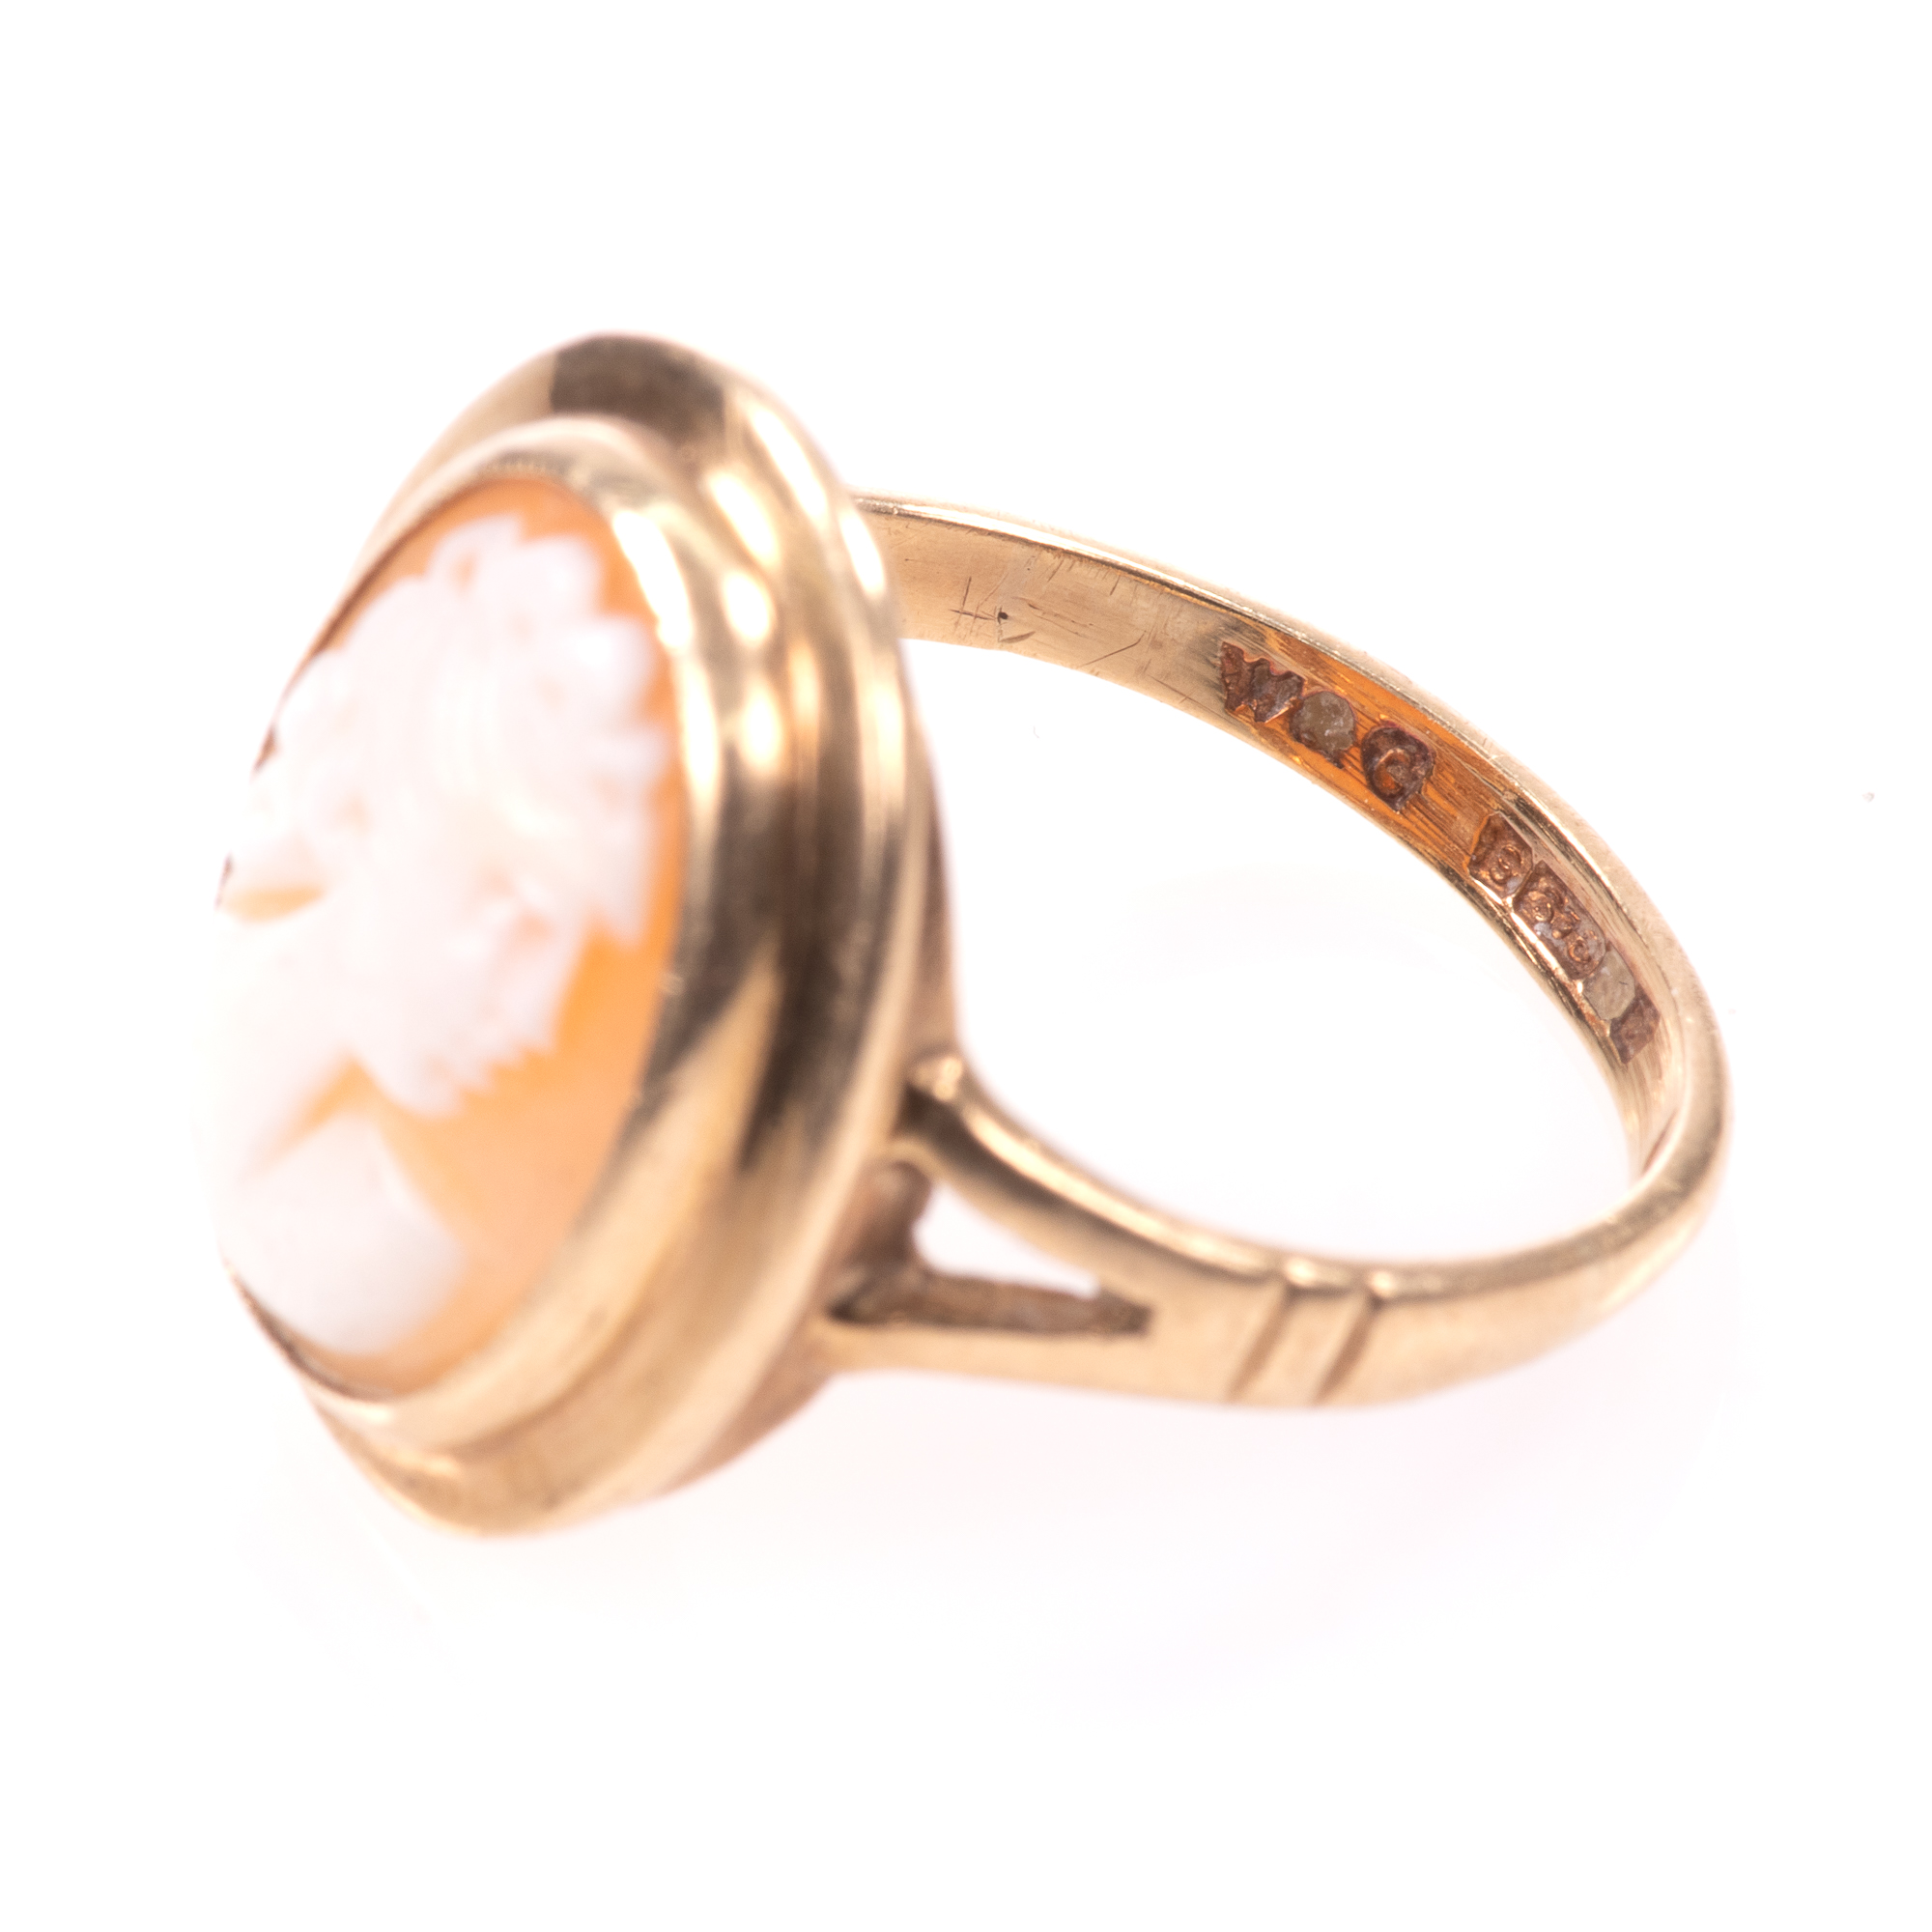 9ct Gold Classical Cameo Ring - Image 5 of 7